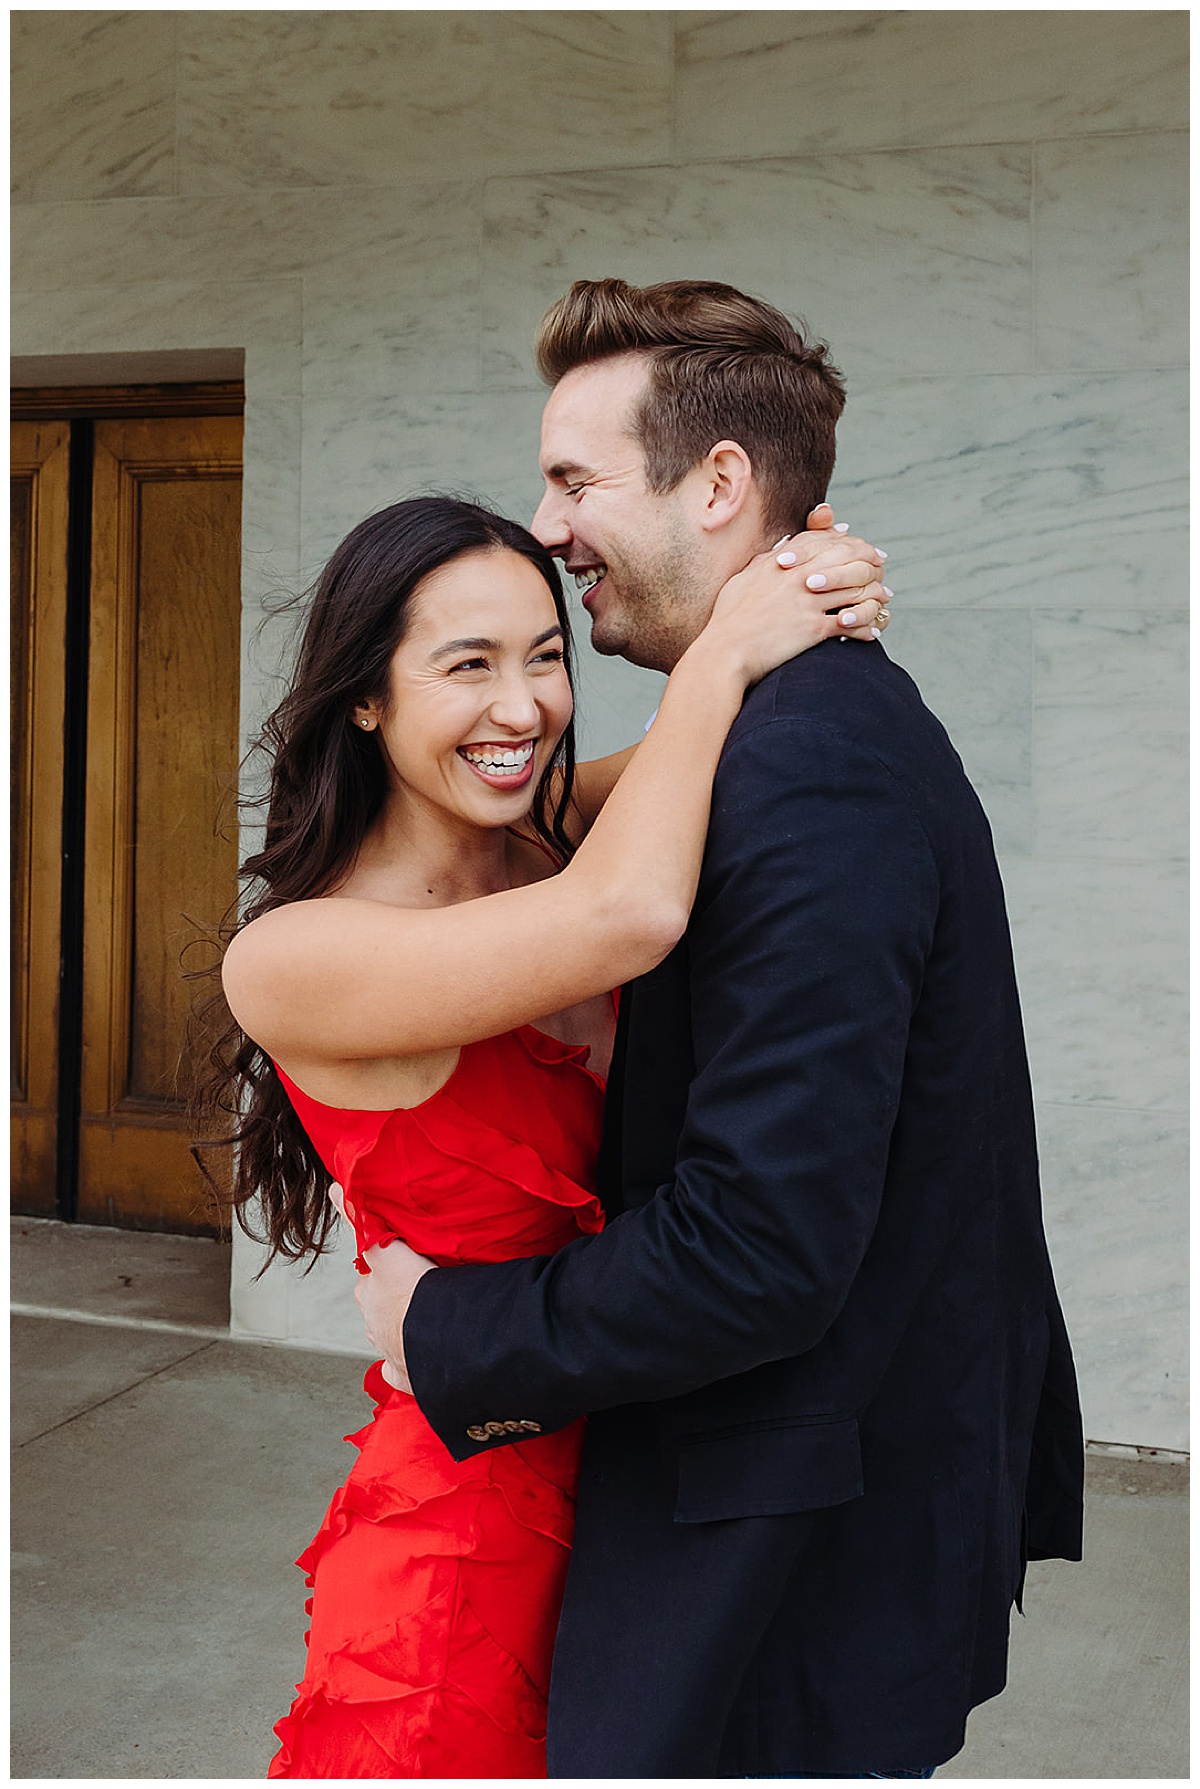 Future husband and wife laugh together for DIA Engagement Session